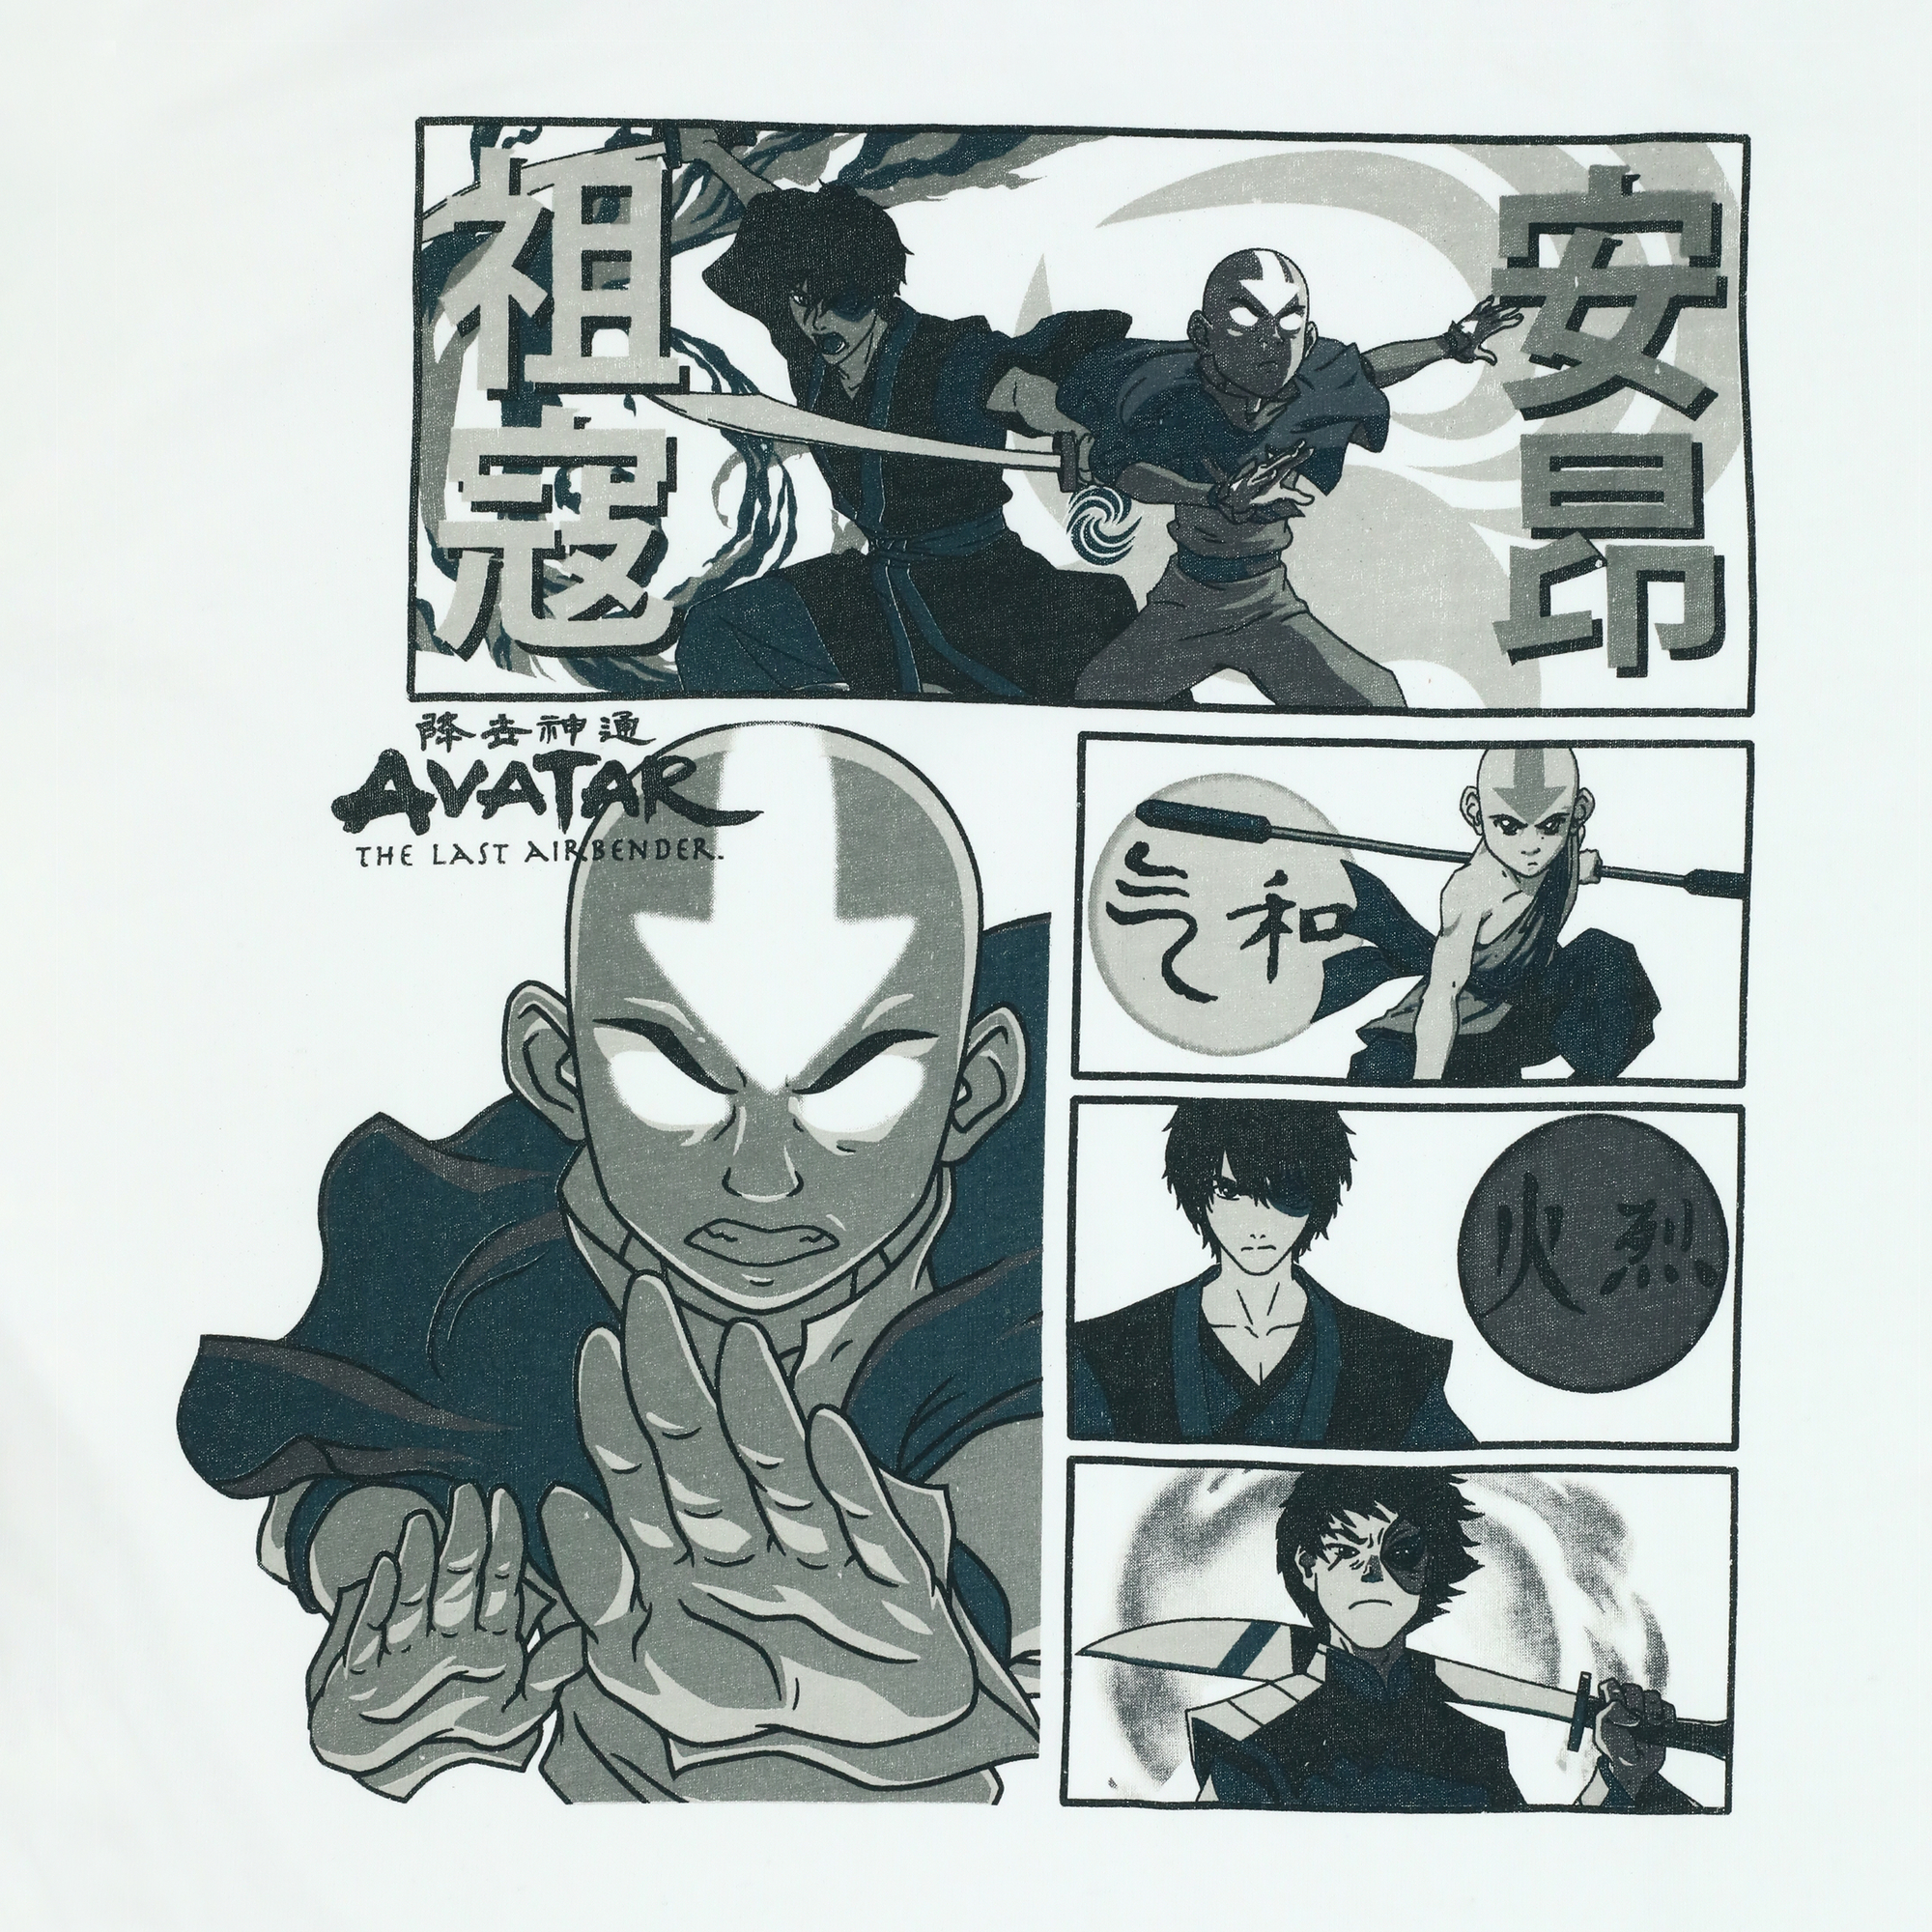 avatar: the last airbender™ comic graphic tee